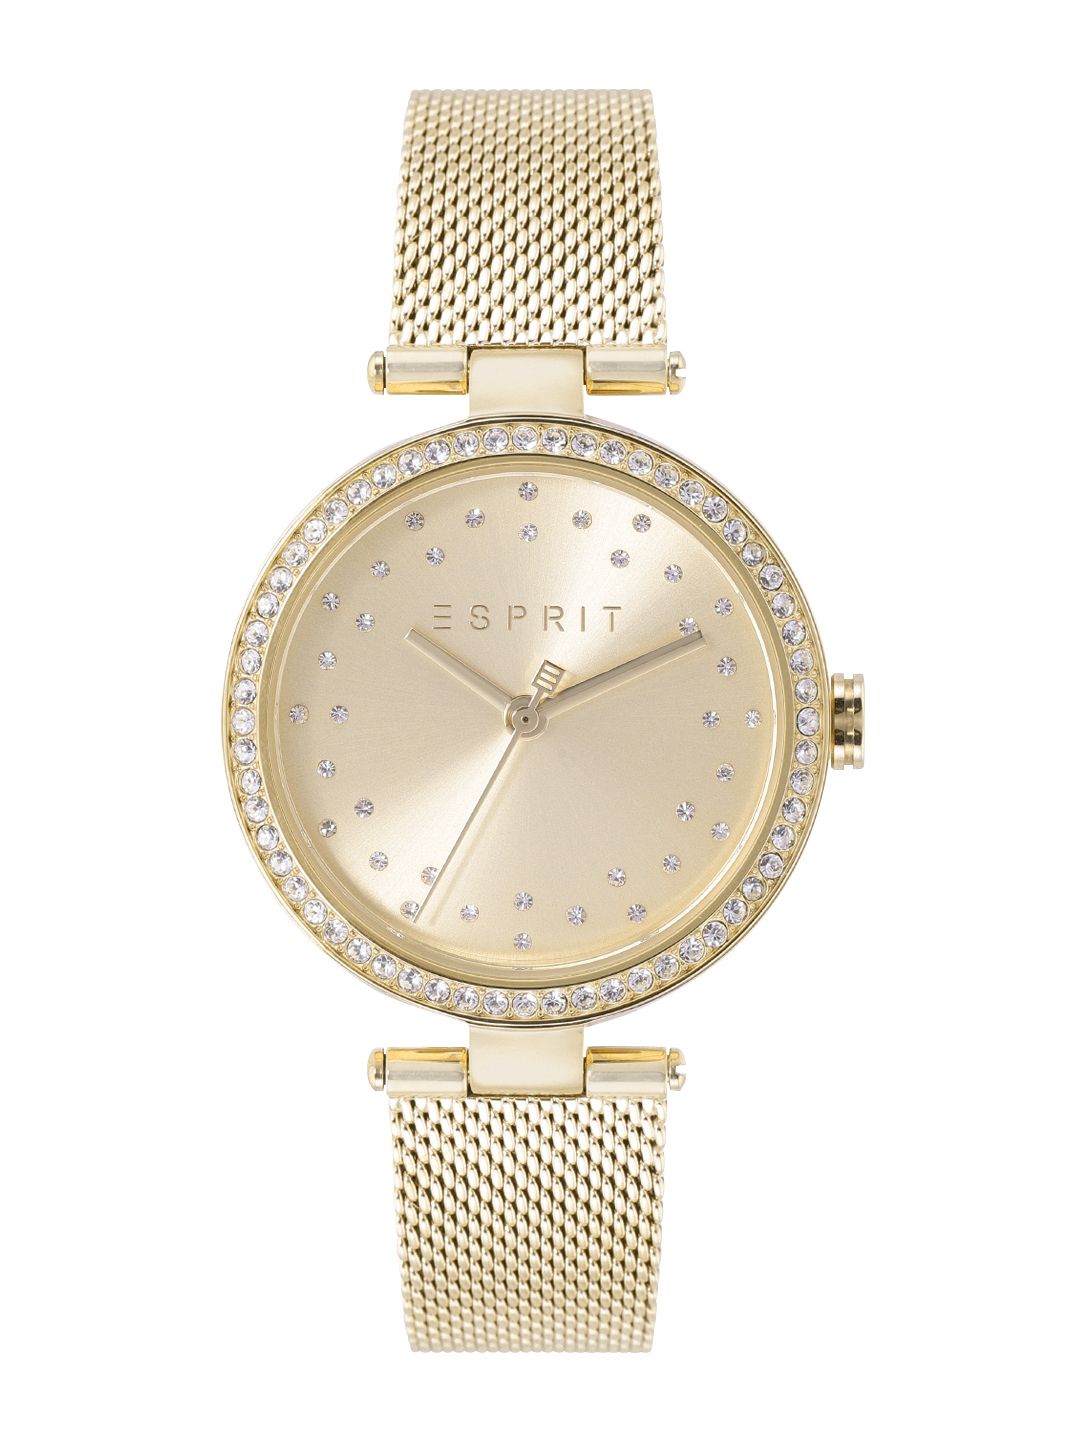 ESPRIT Women Gold-Toned Dial & Bracelet Style Straps Analogue Watch ES1L199M0055 Price in India